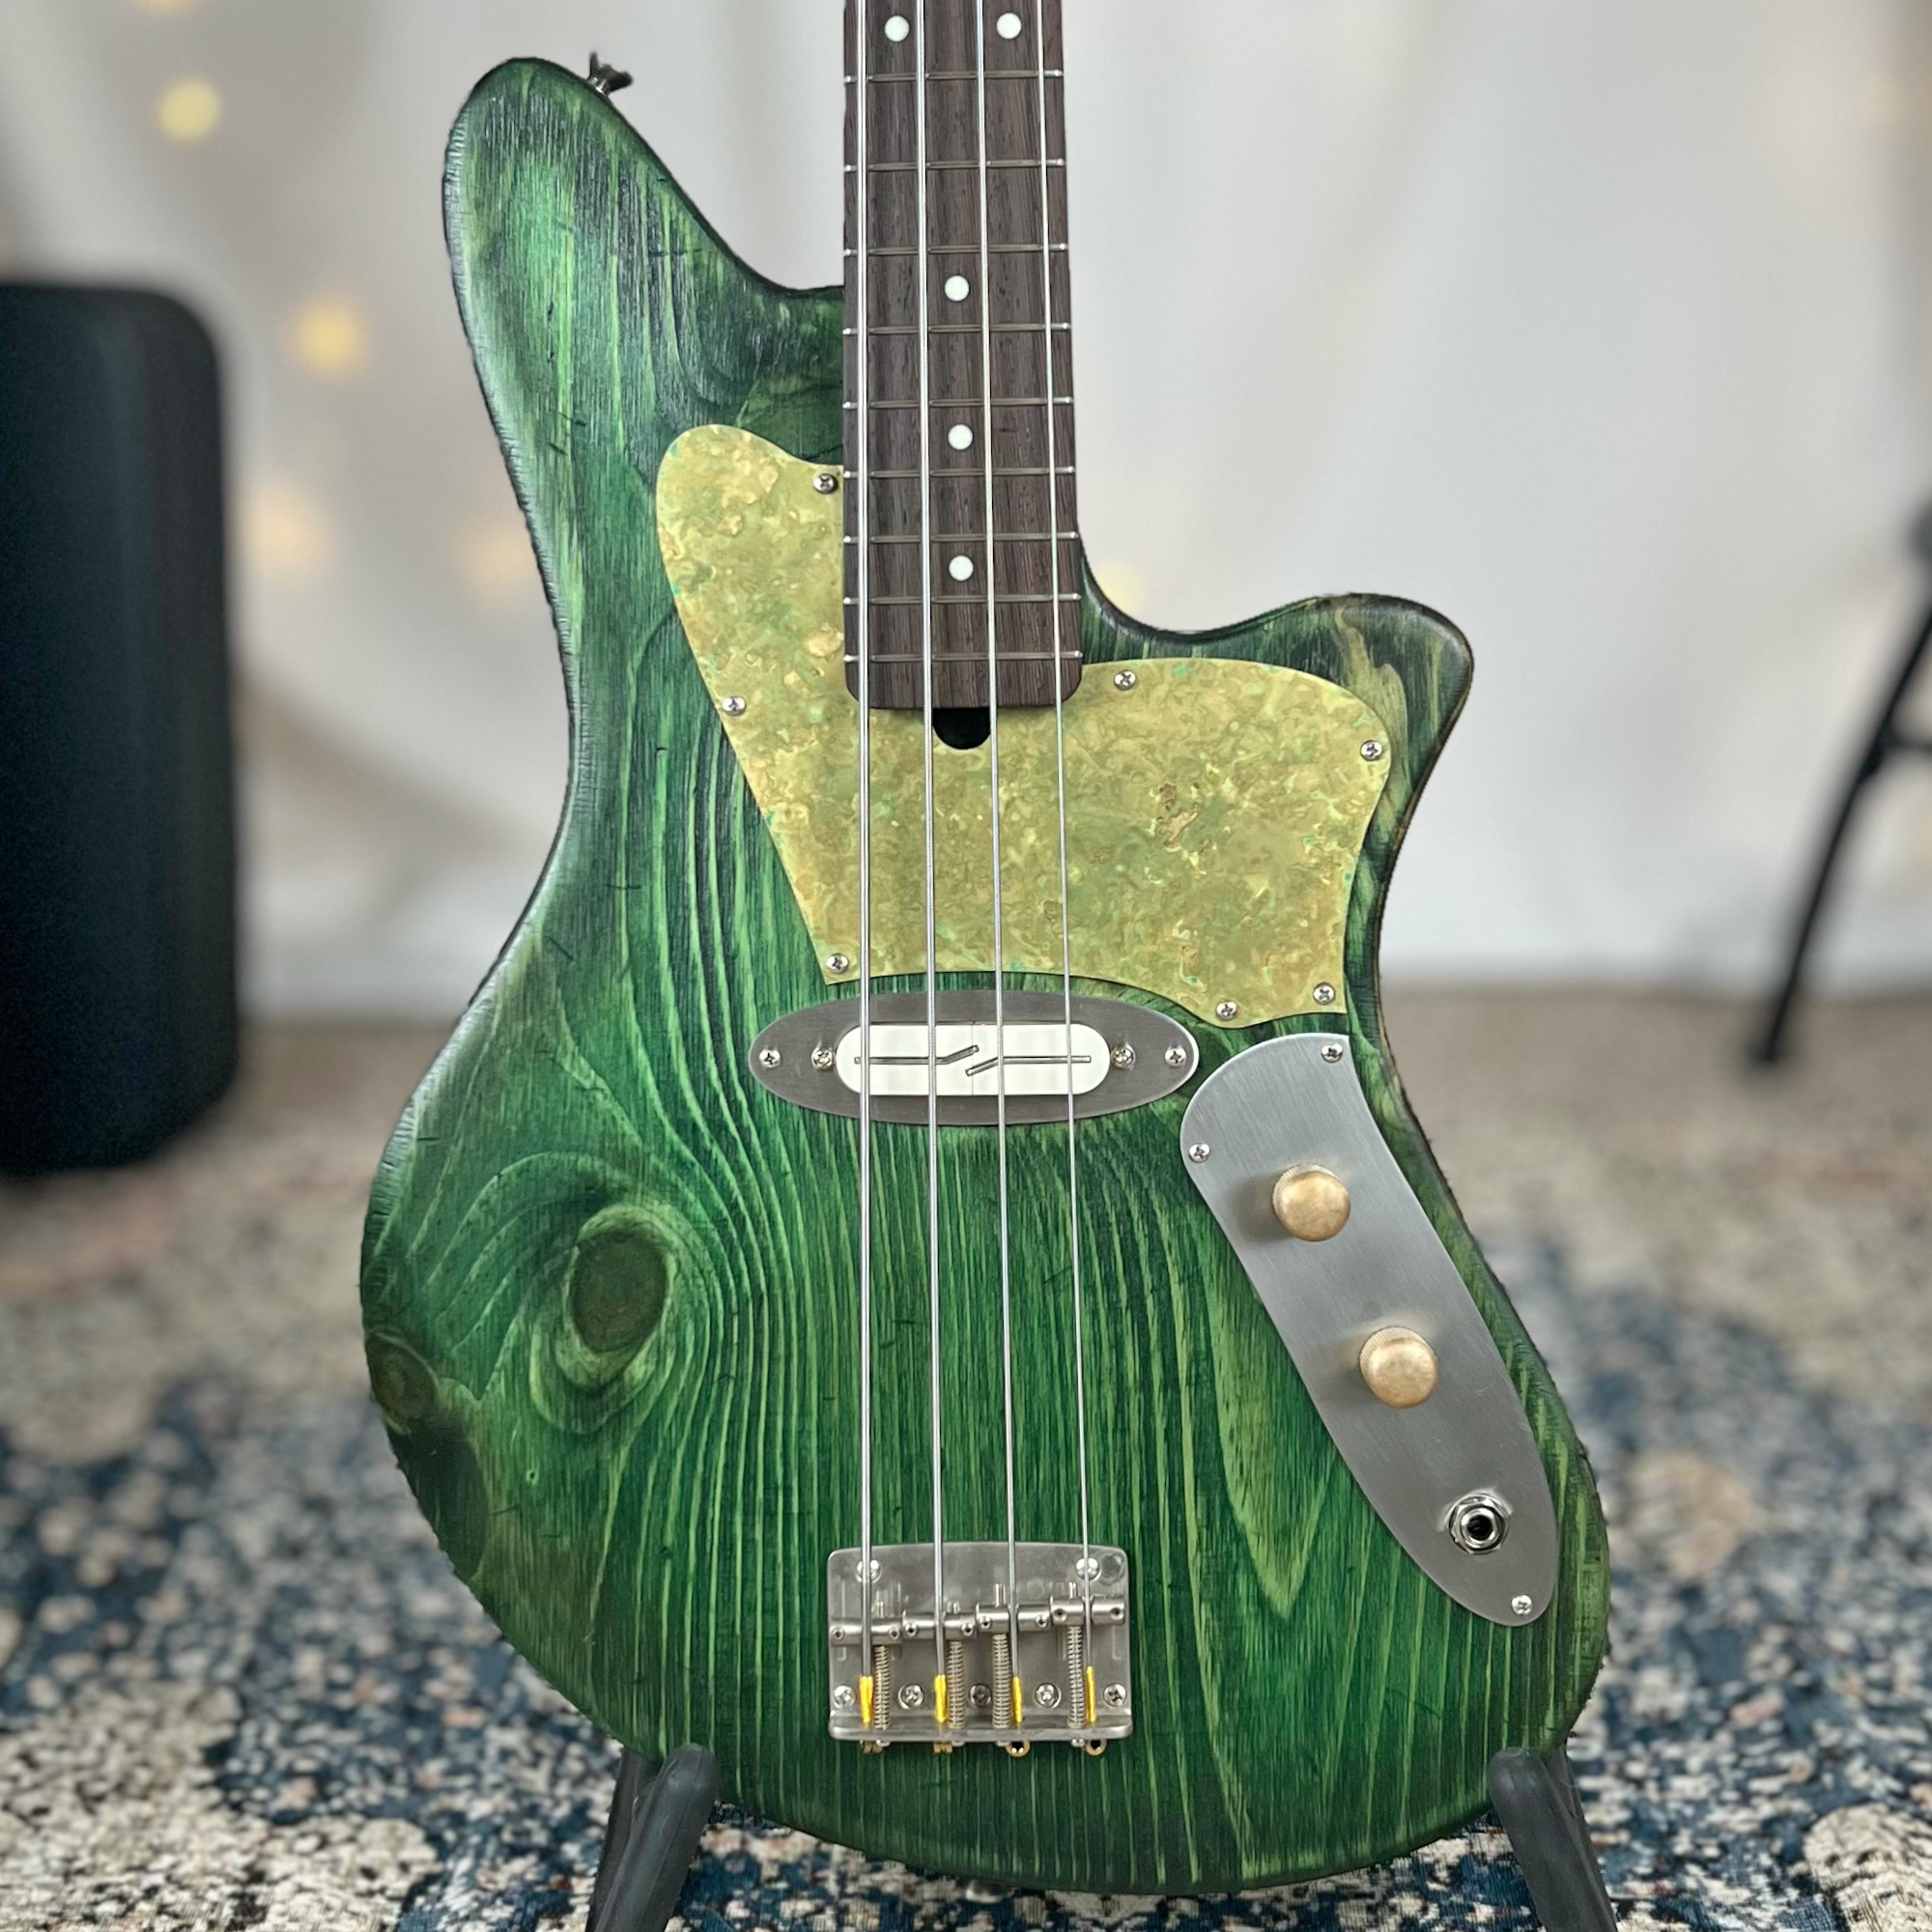 Jackie-O S 30" Short-Scale Bass in Emerald City on Distressed Pine with Fralin Split Blade Strat Pickup